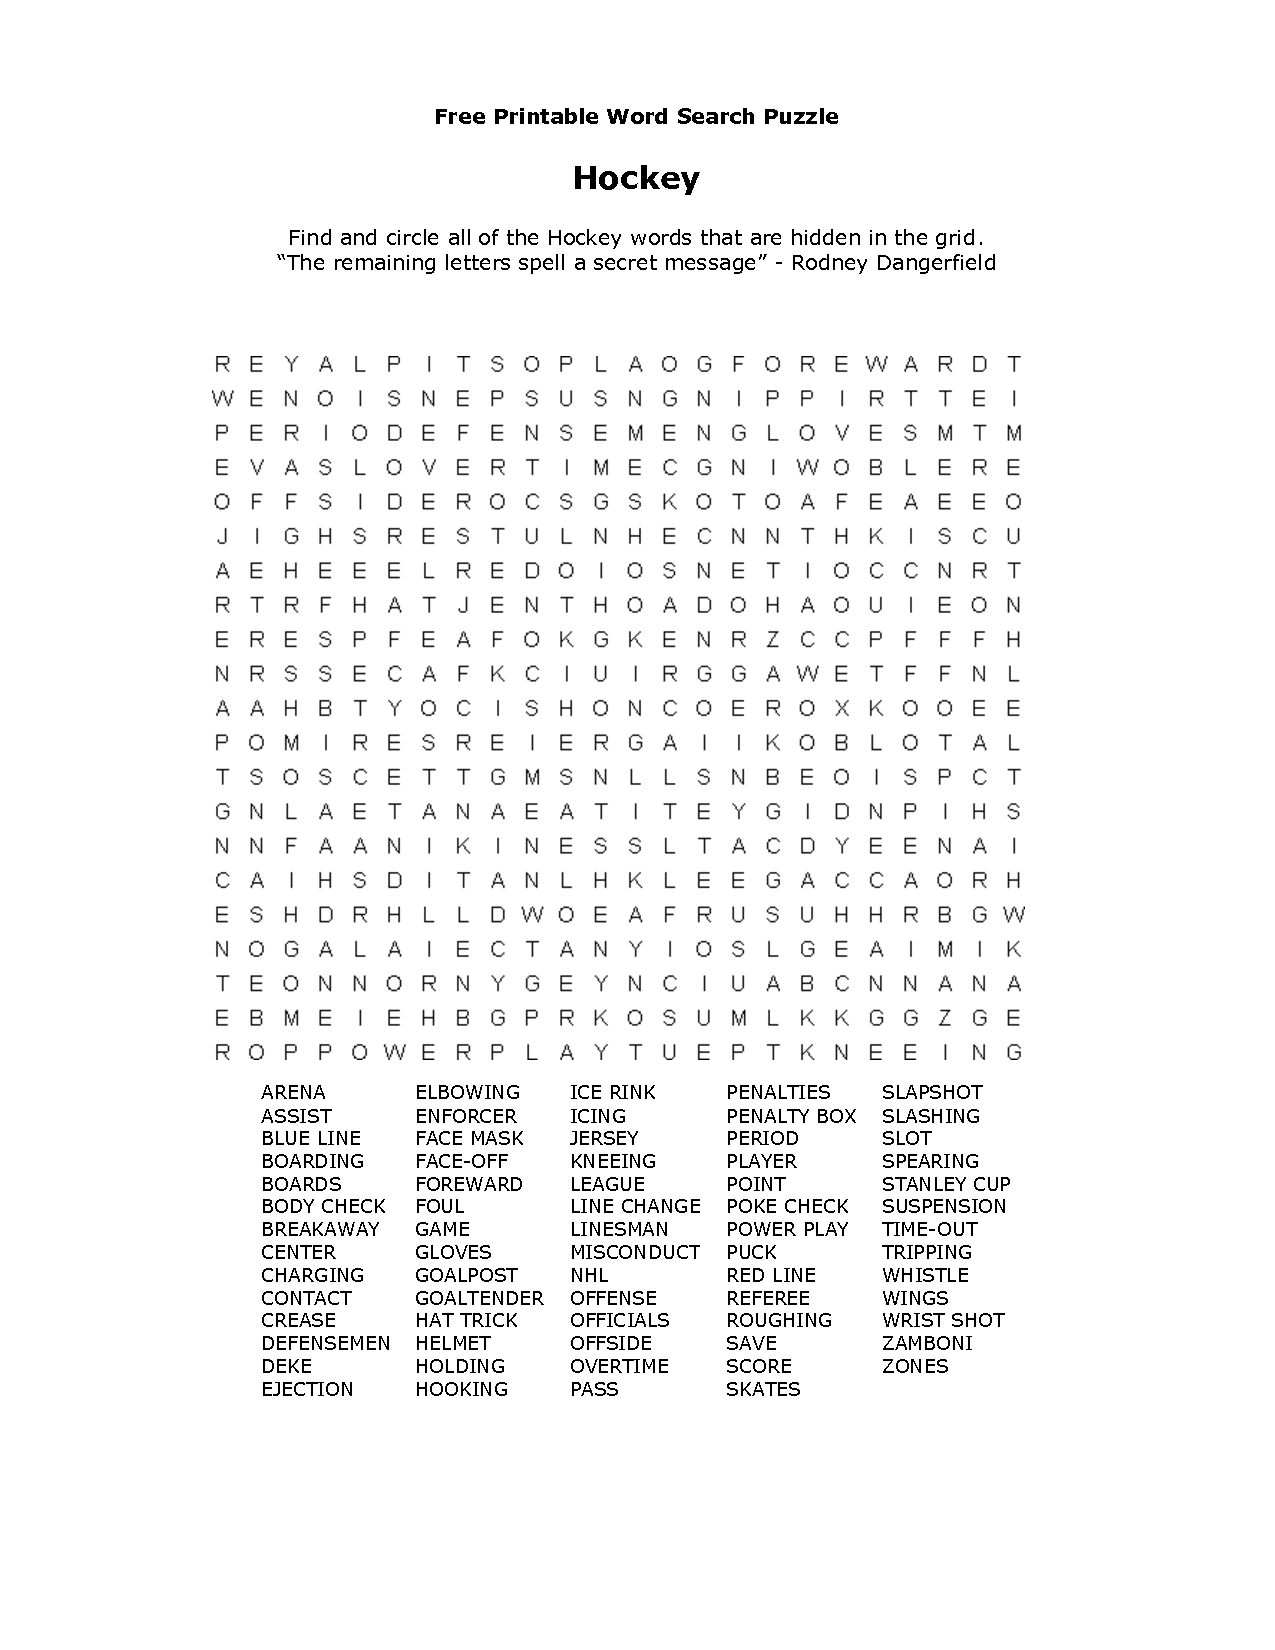 free-printable-word-search-puzzles-for-adults-free-printable-a-to-z